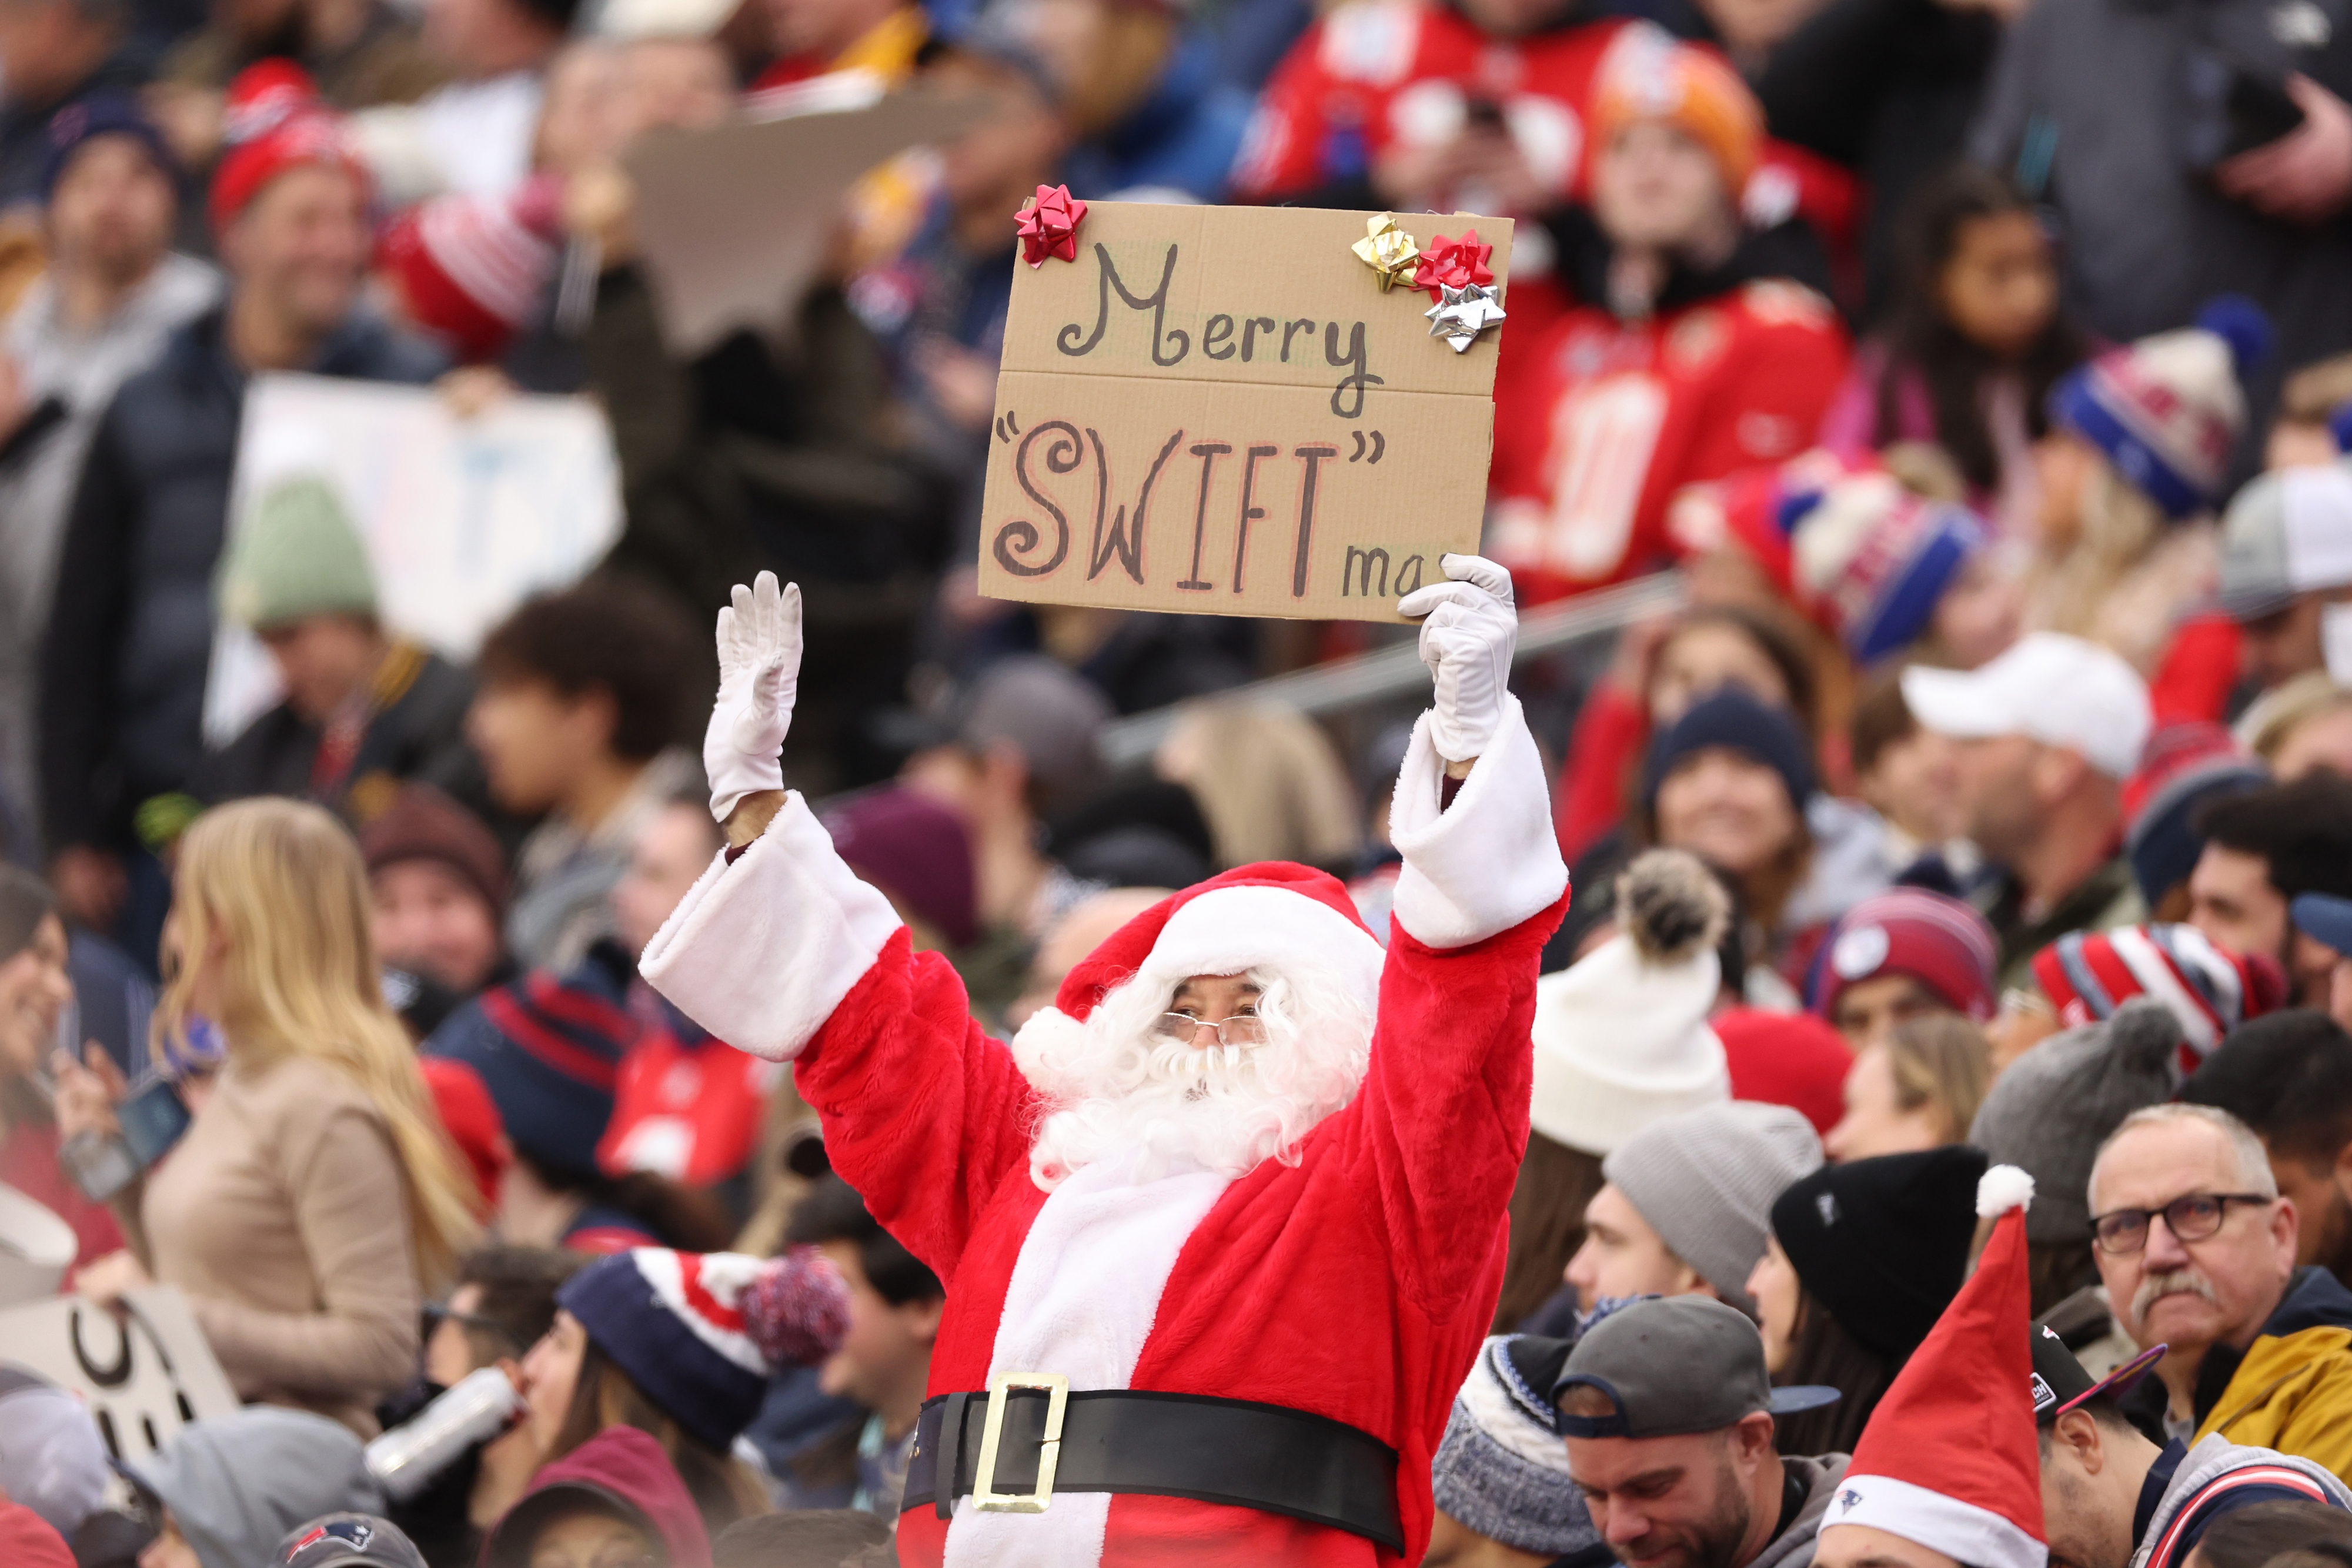 Someone in a Santa outfit holding up a &quot;Merry &#x27;Swift&#x27;mas&quot; sign in the crowd